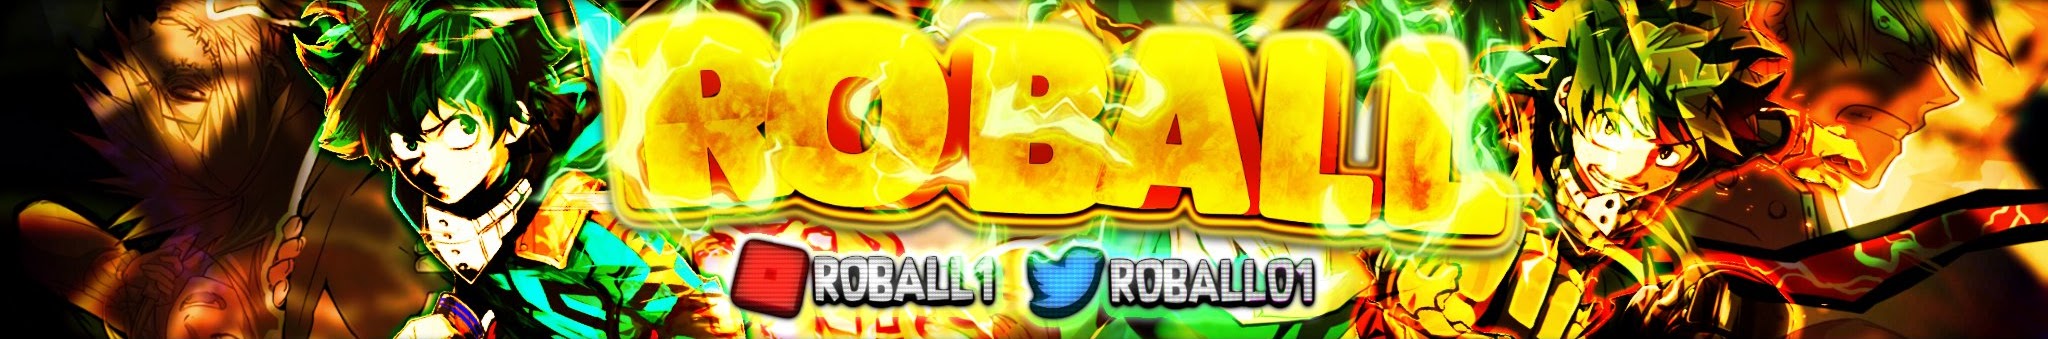 Roball Youtube Channel Analytics And Report Powered By Noxinfluencer Mobile - insect breathing the best pvp breath demon slayer roblox youtube